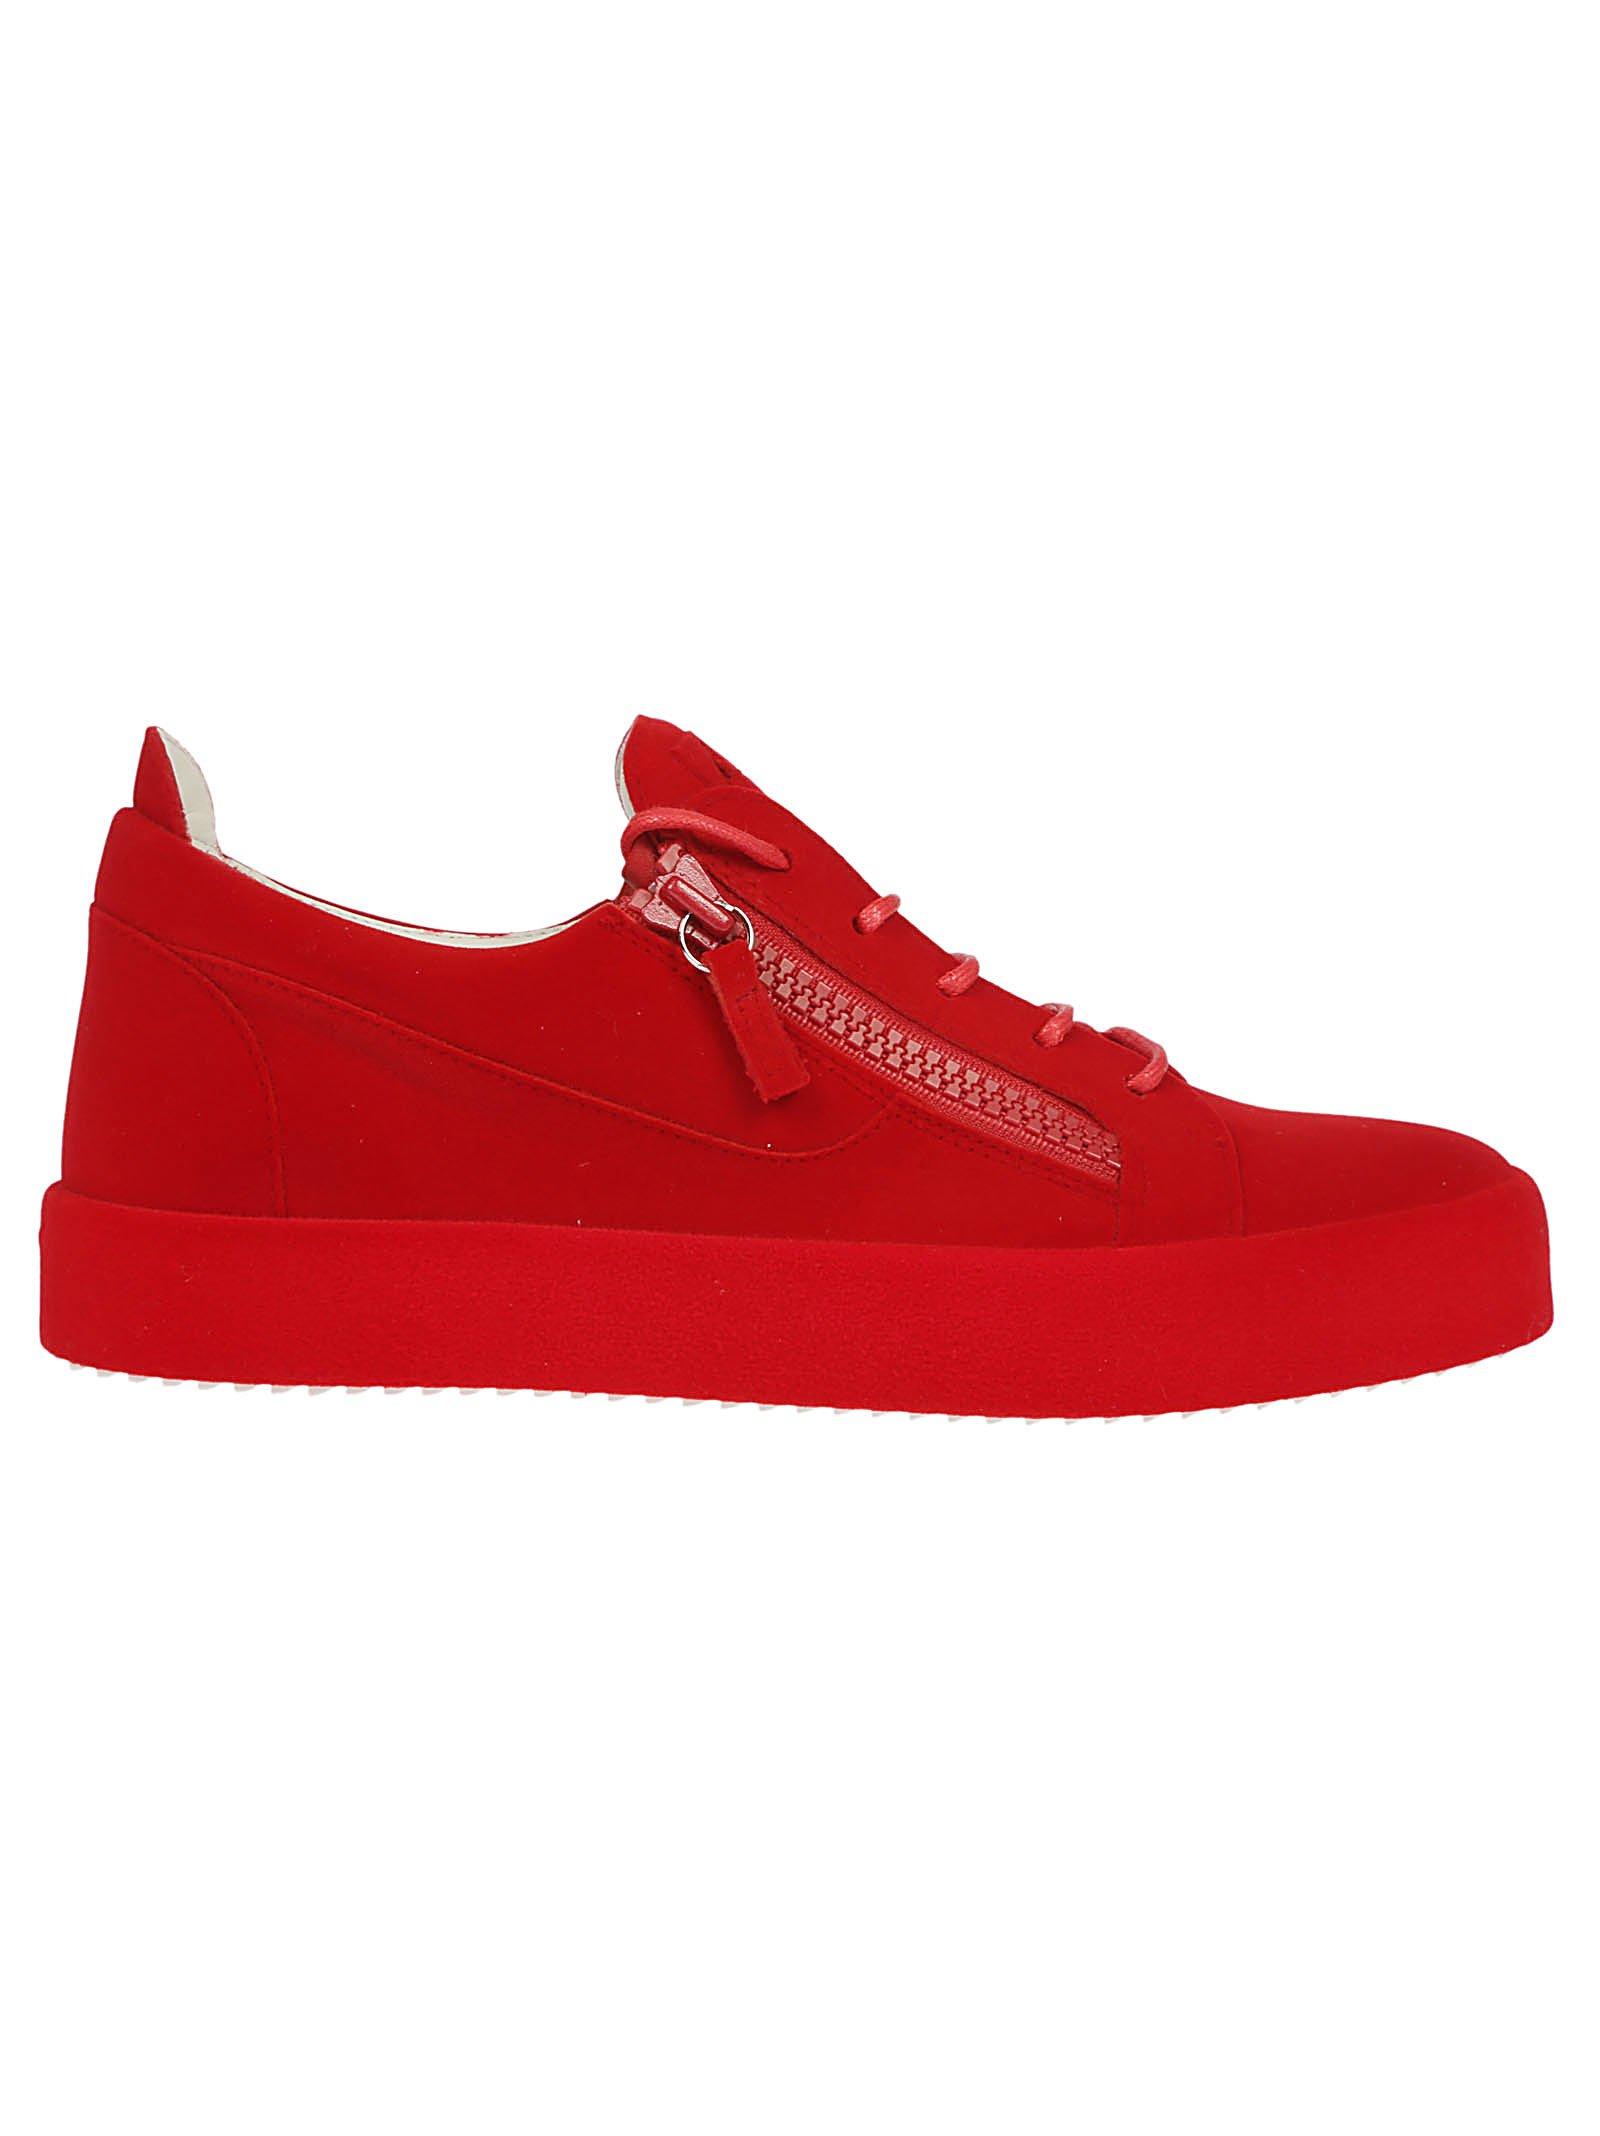 Giuseppe Zanotti Design The Unfinished Sneakers In Red | ModeSens